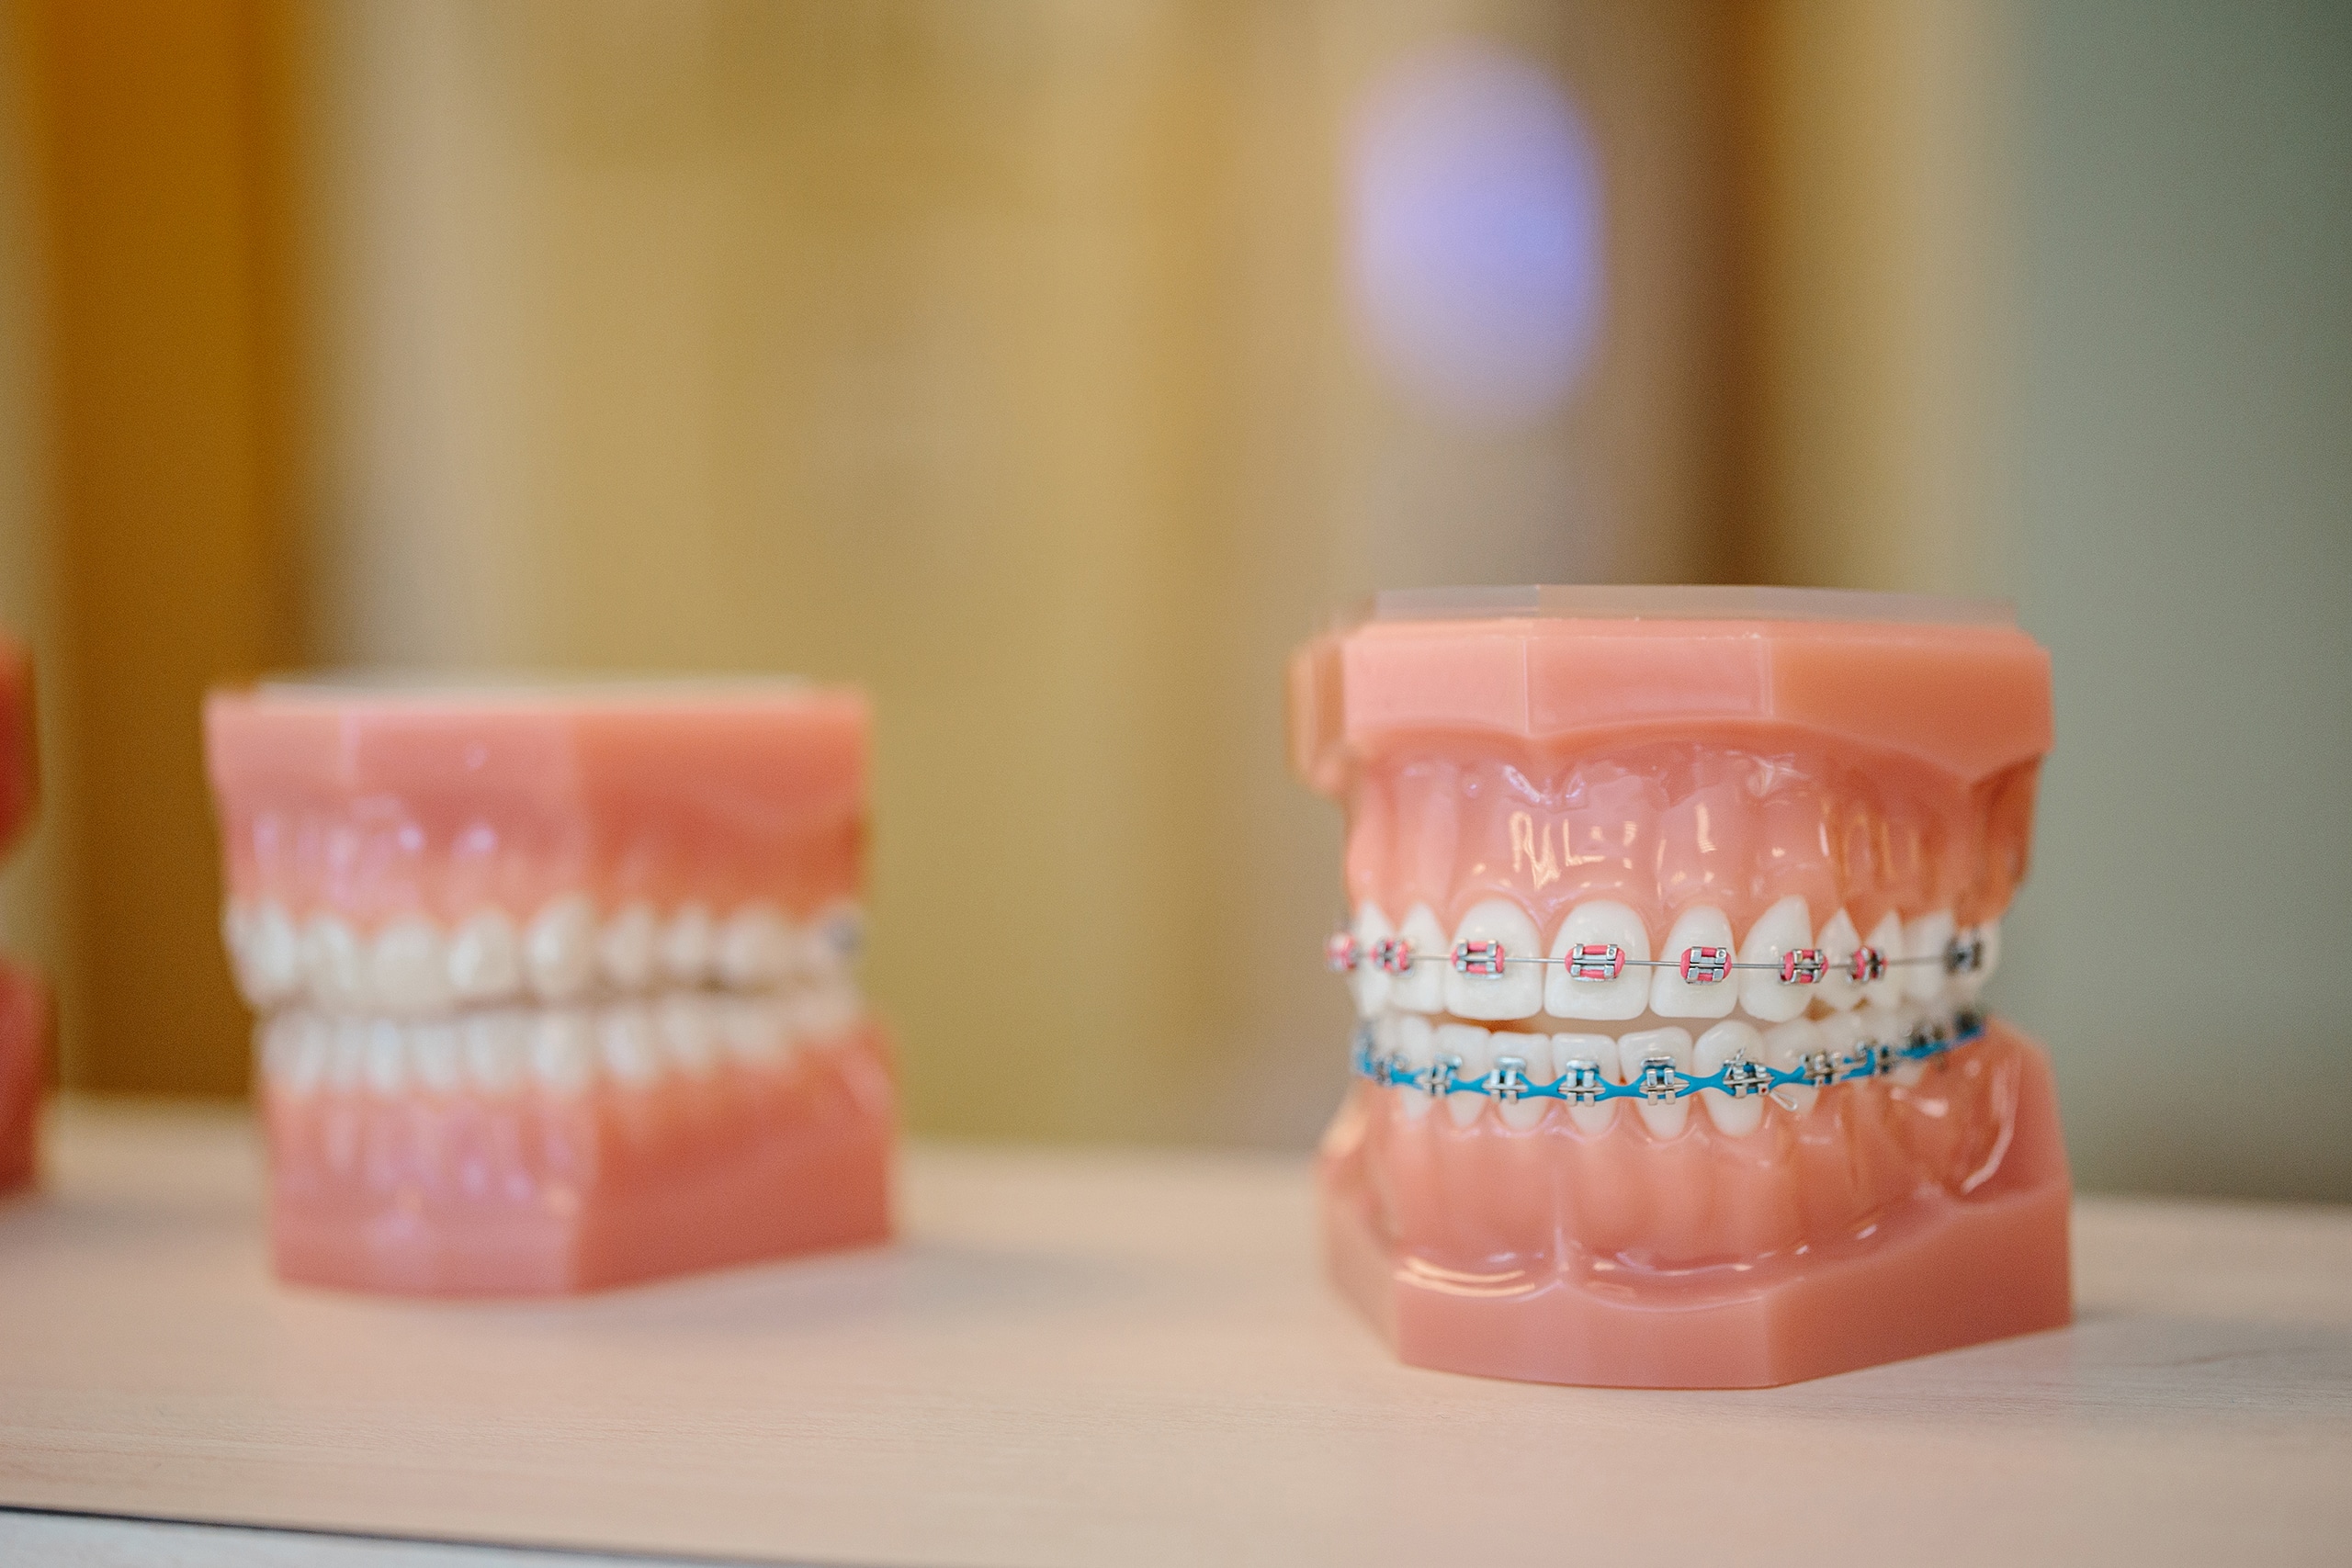 A set of plastic teeth models with metal and clear braces.